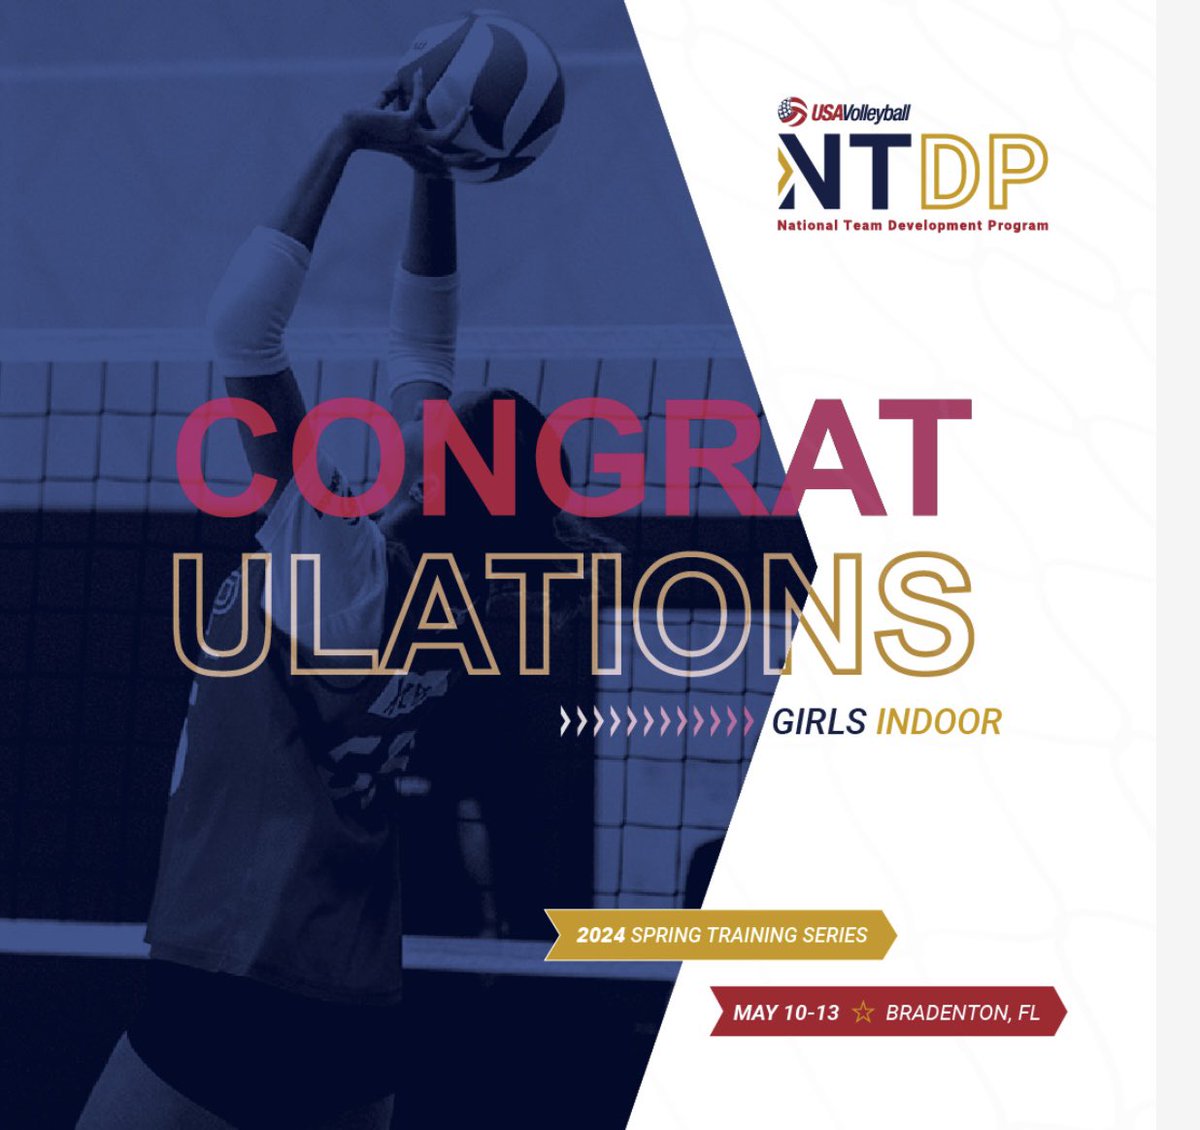 So blessed to have received an invite to represent the U17 USA Volleyball’s National Team Development program! Thank you for the recognition and amazing opportunity 💙❤️🤍 @usavolleyball #usav_ntdp